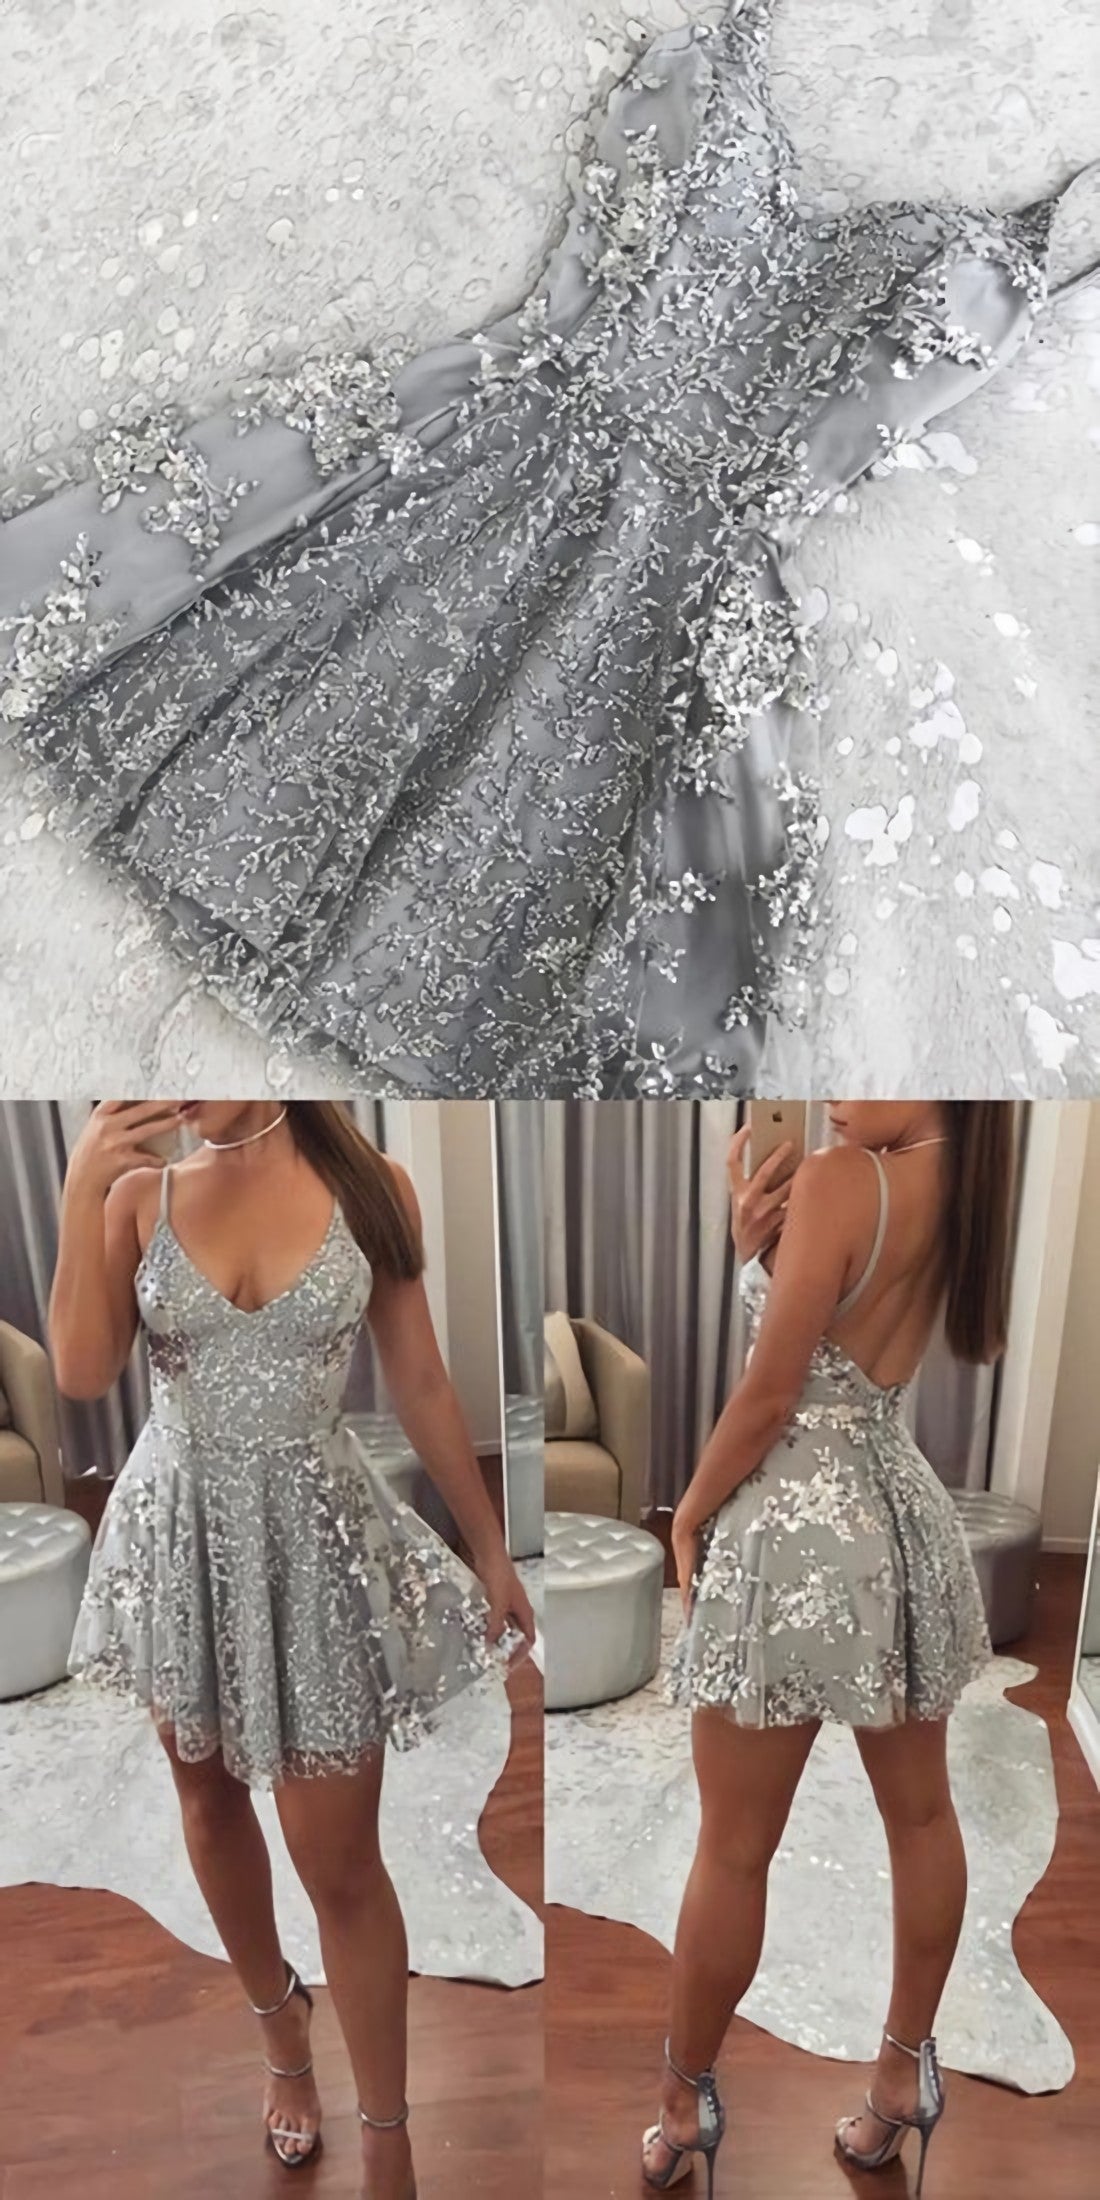 Charming Lace Prom Dress, Sexy Short Prom Dress, Spaghetti Straps Prom Gowns Cheap Homecoming Dress, Hot